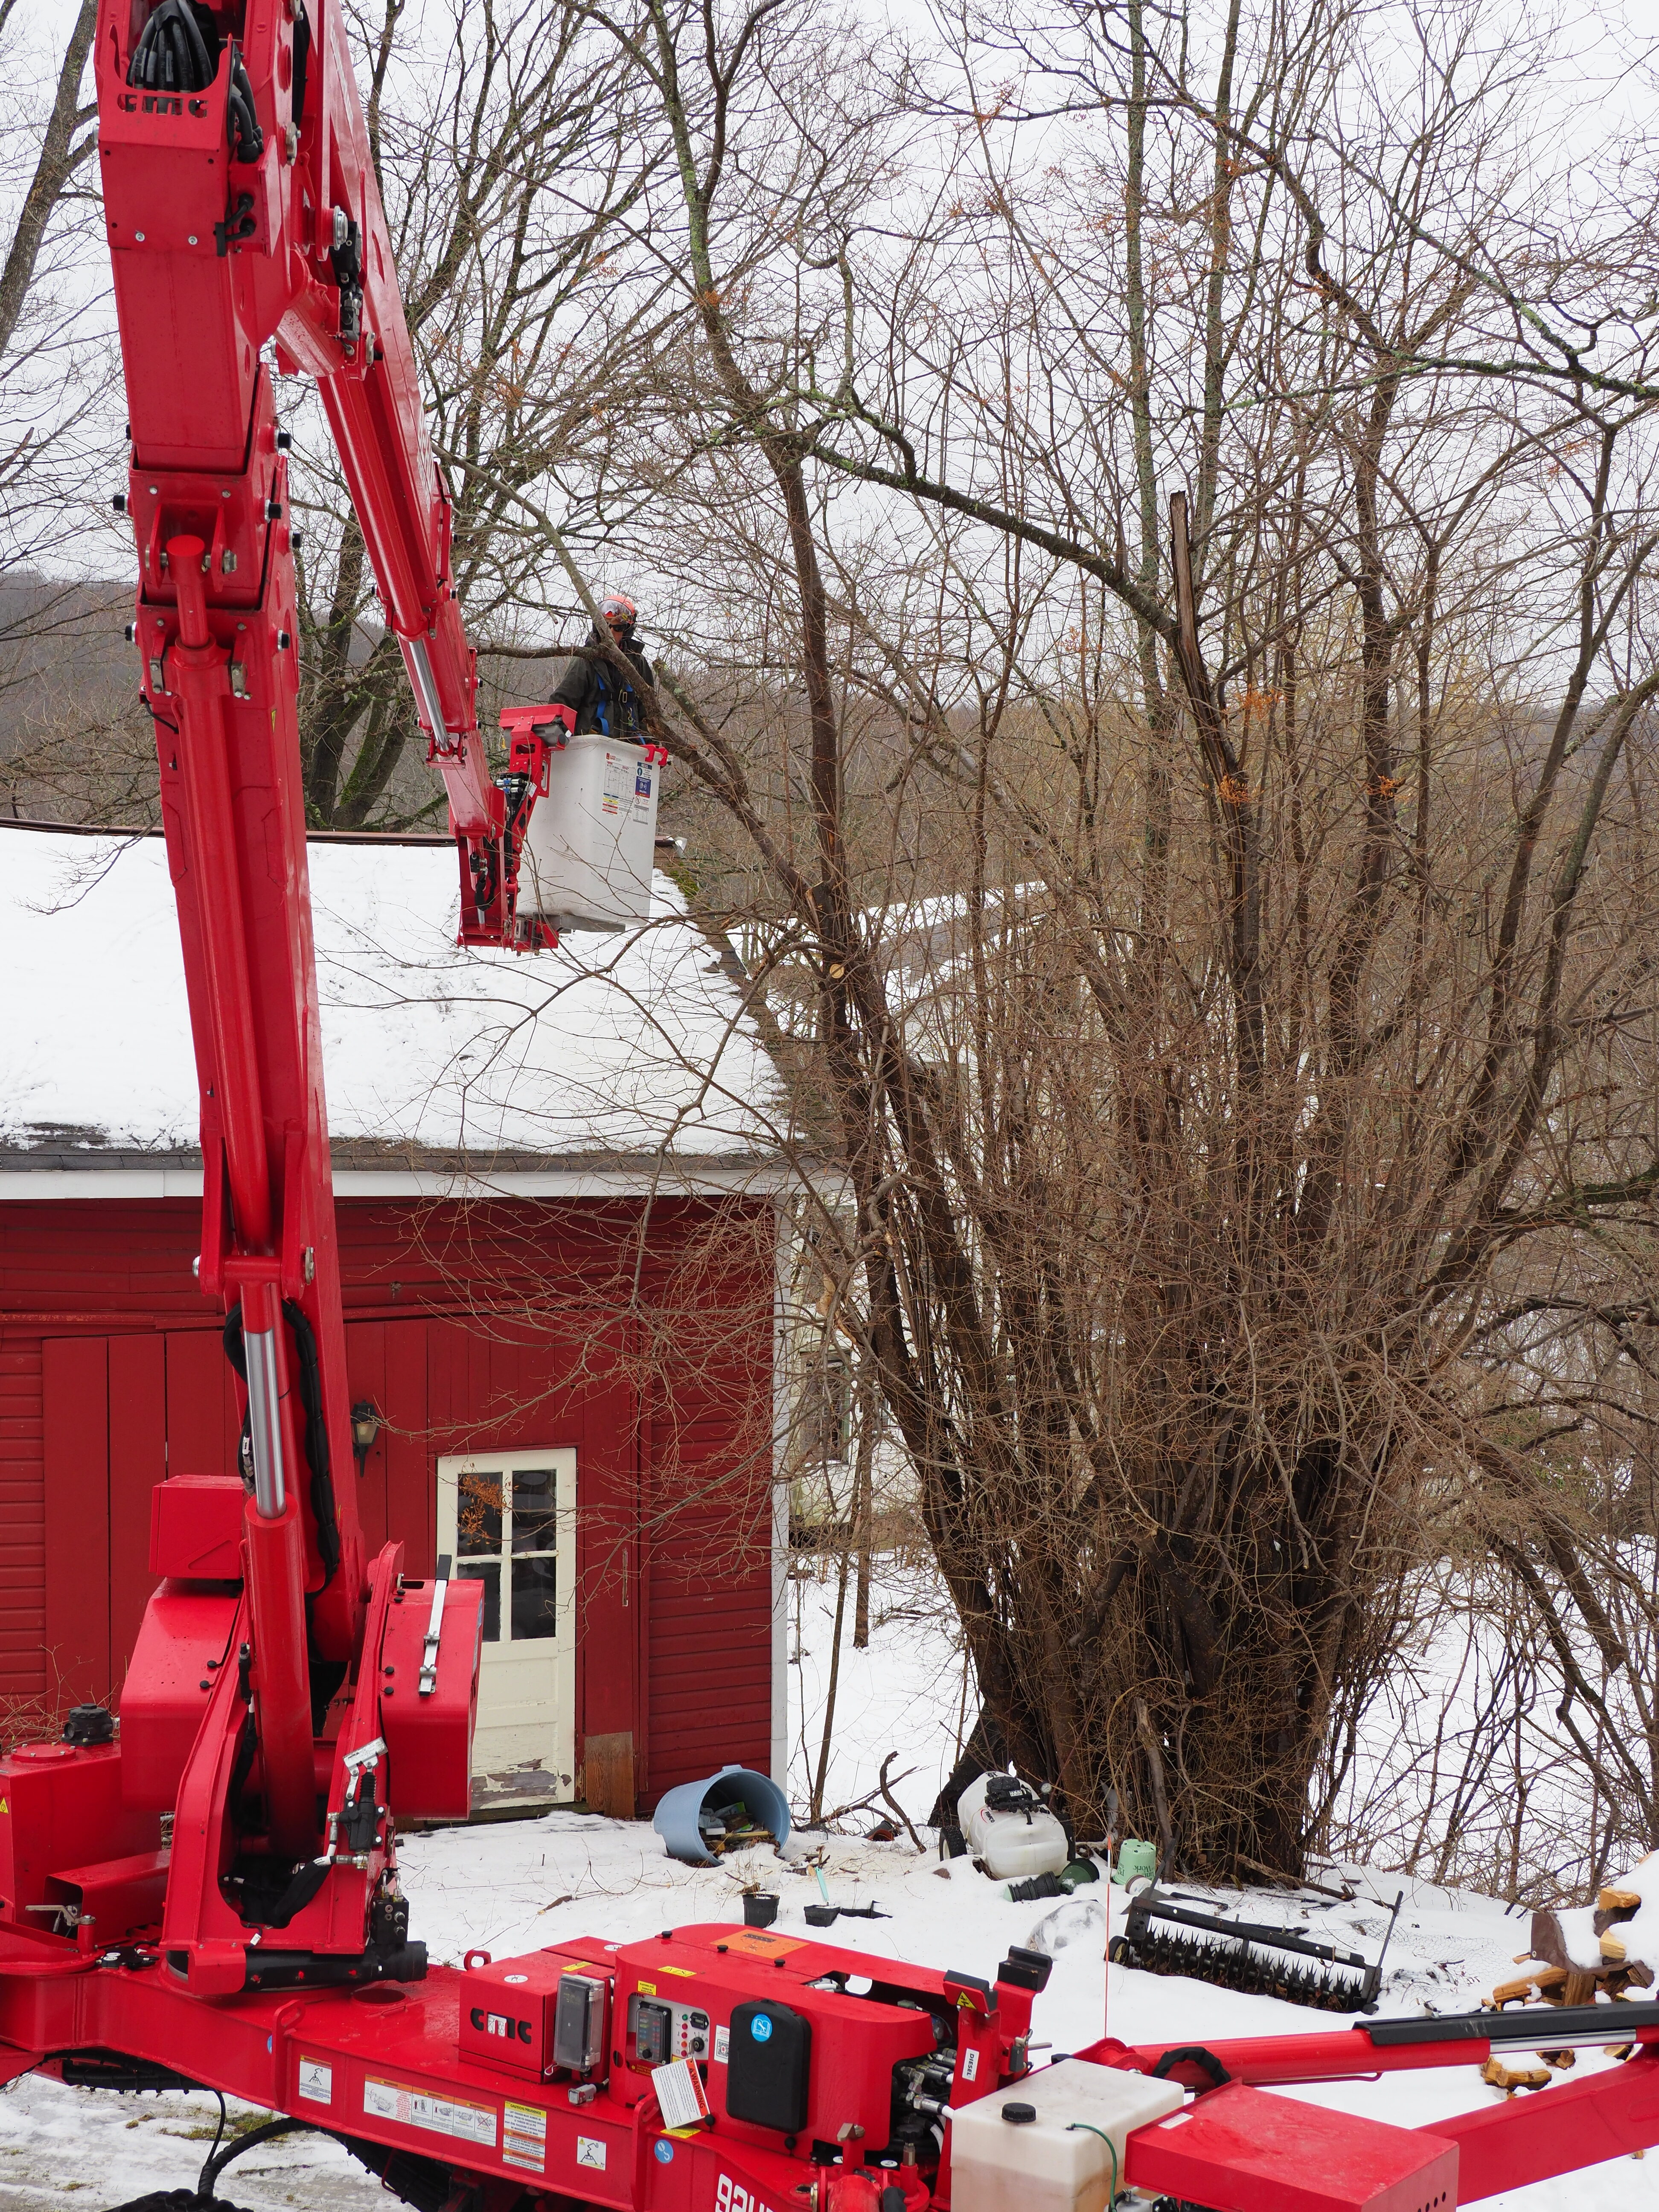 Using an articulated arm, an arborist in the bucket is able to get to limbs and branches without damaging the barn roof. The entire machine moves on rubber tracks making lawn and soil damage minimal. ANDREW MESSINGER